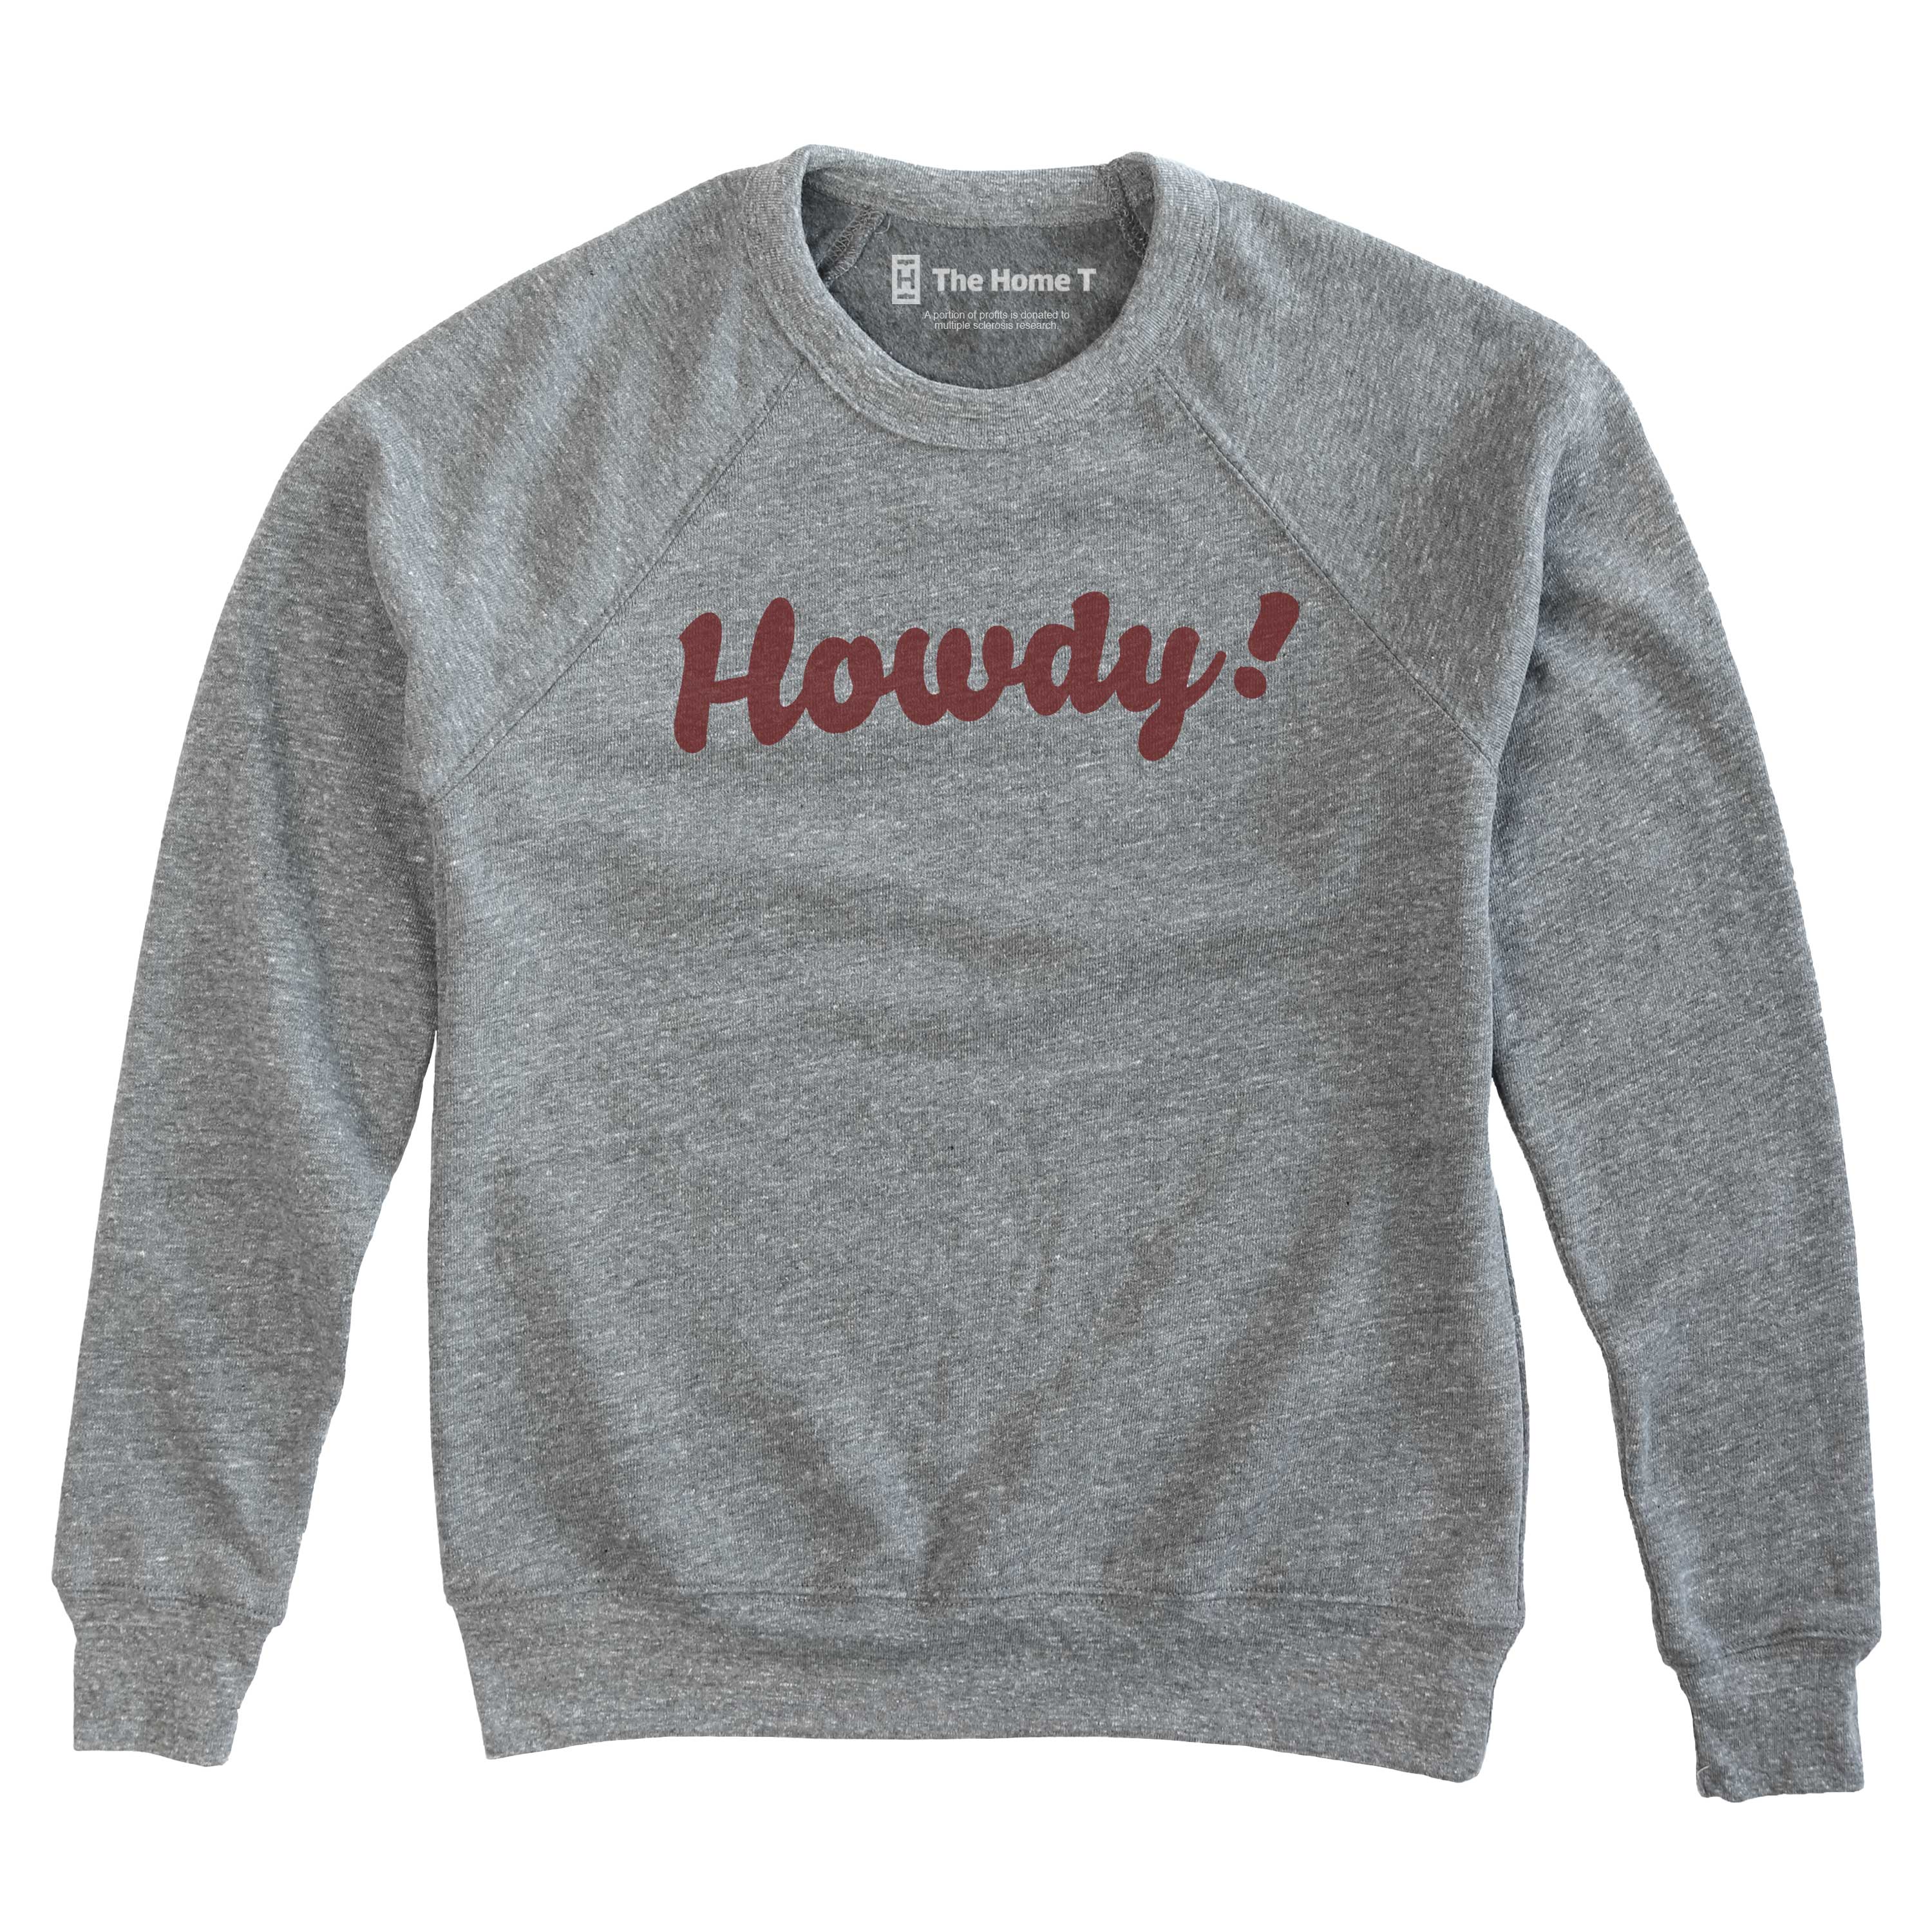 Howdy! Crew neck The Home T XS Stone